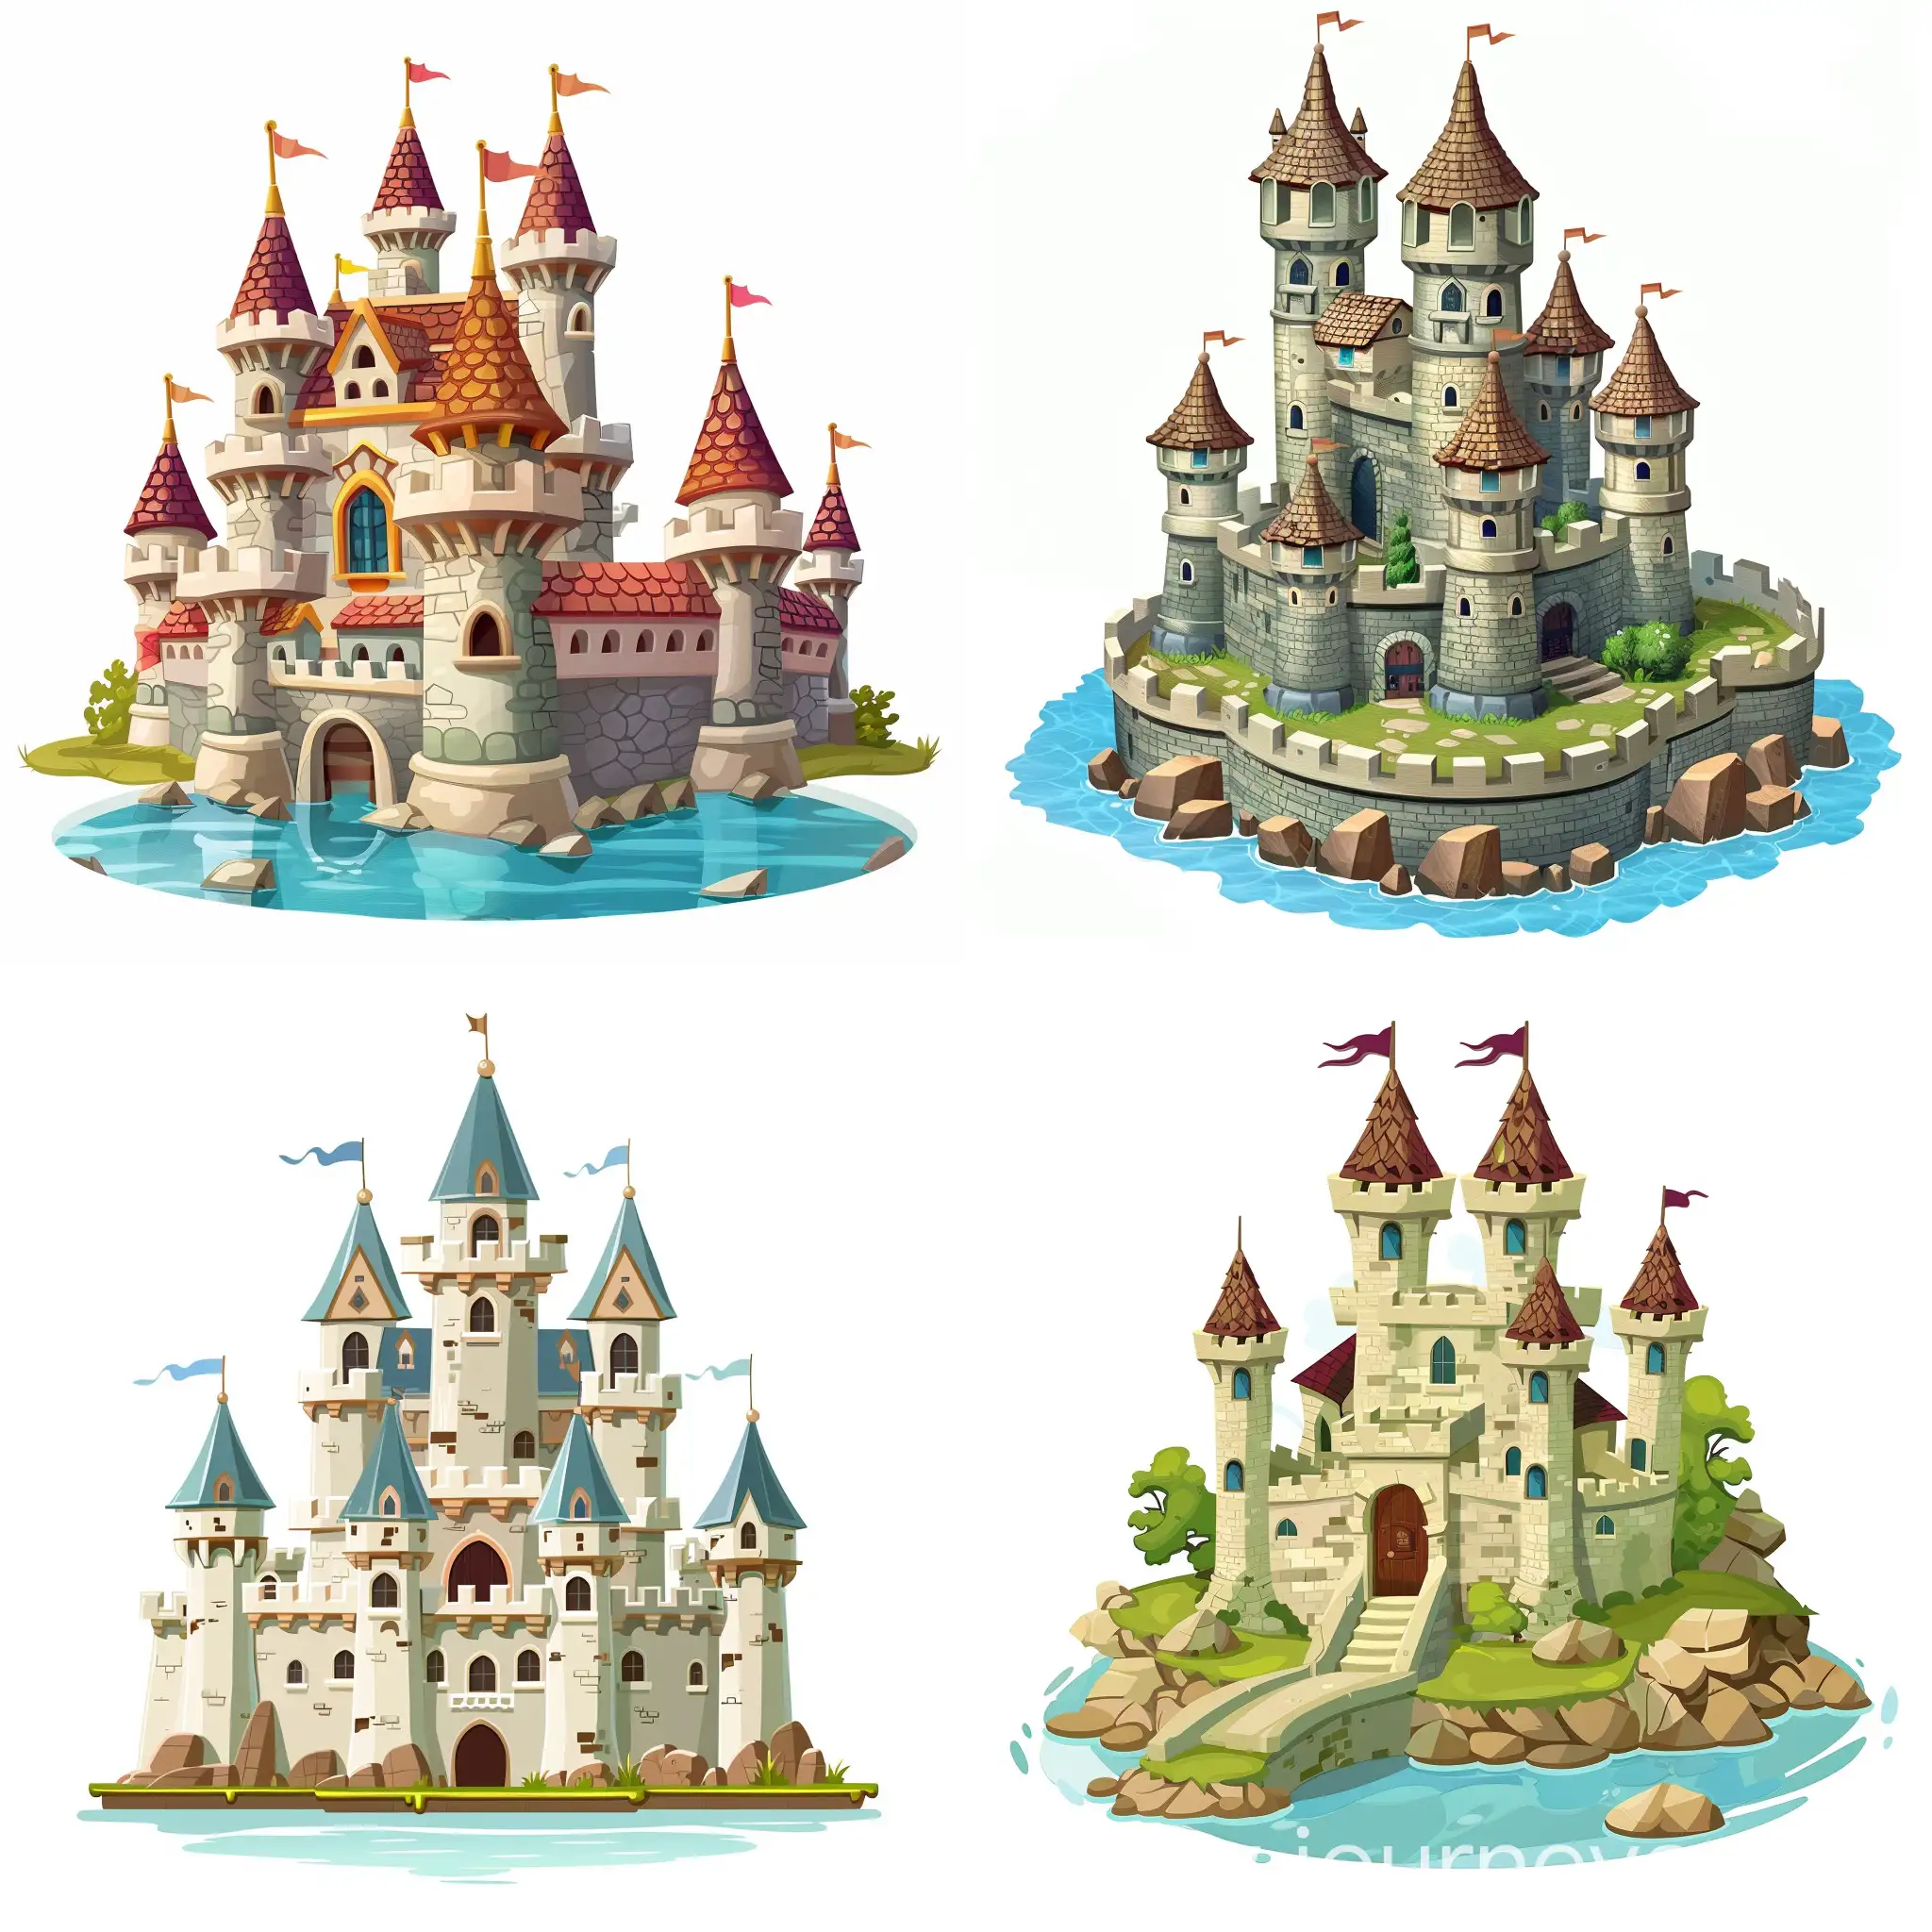 Cartoon-Castle-with-Moat-on-White-Background-for-Mobile-Game